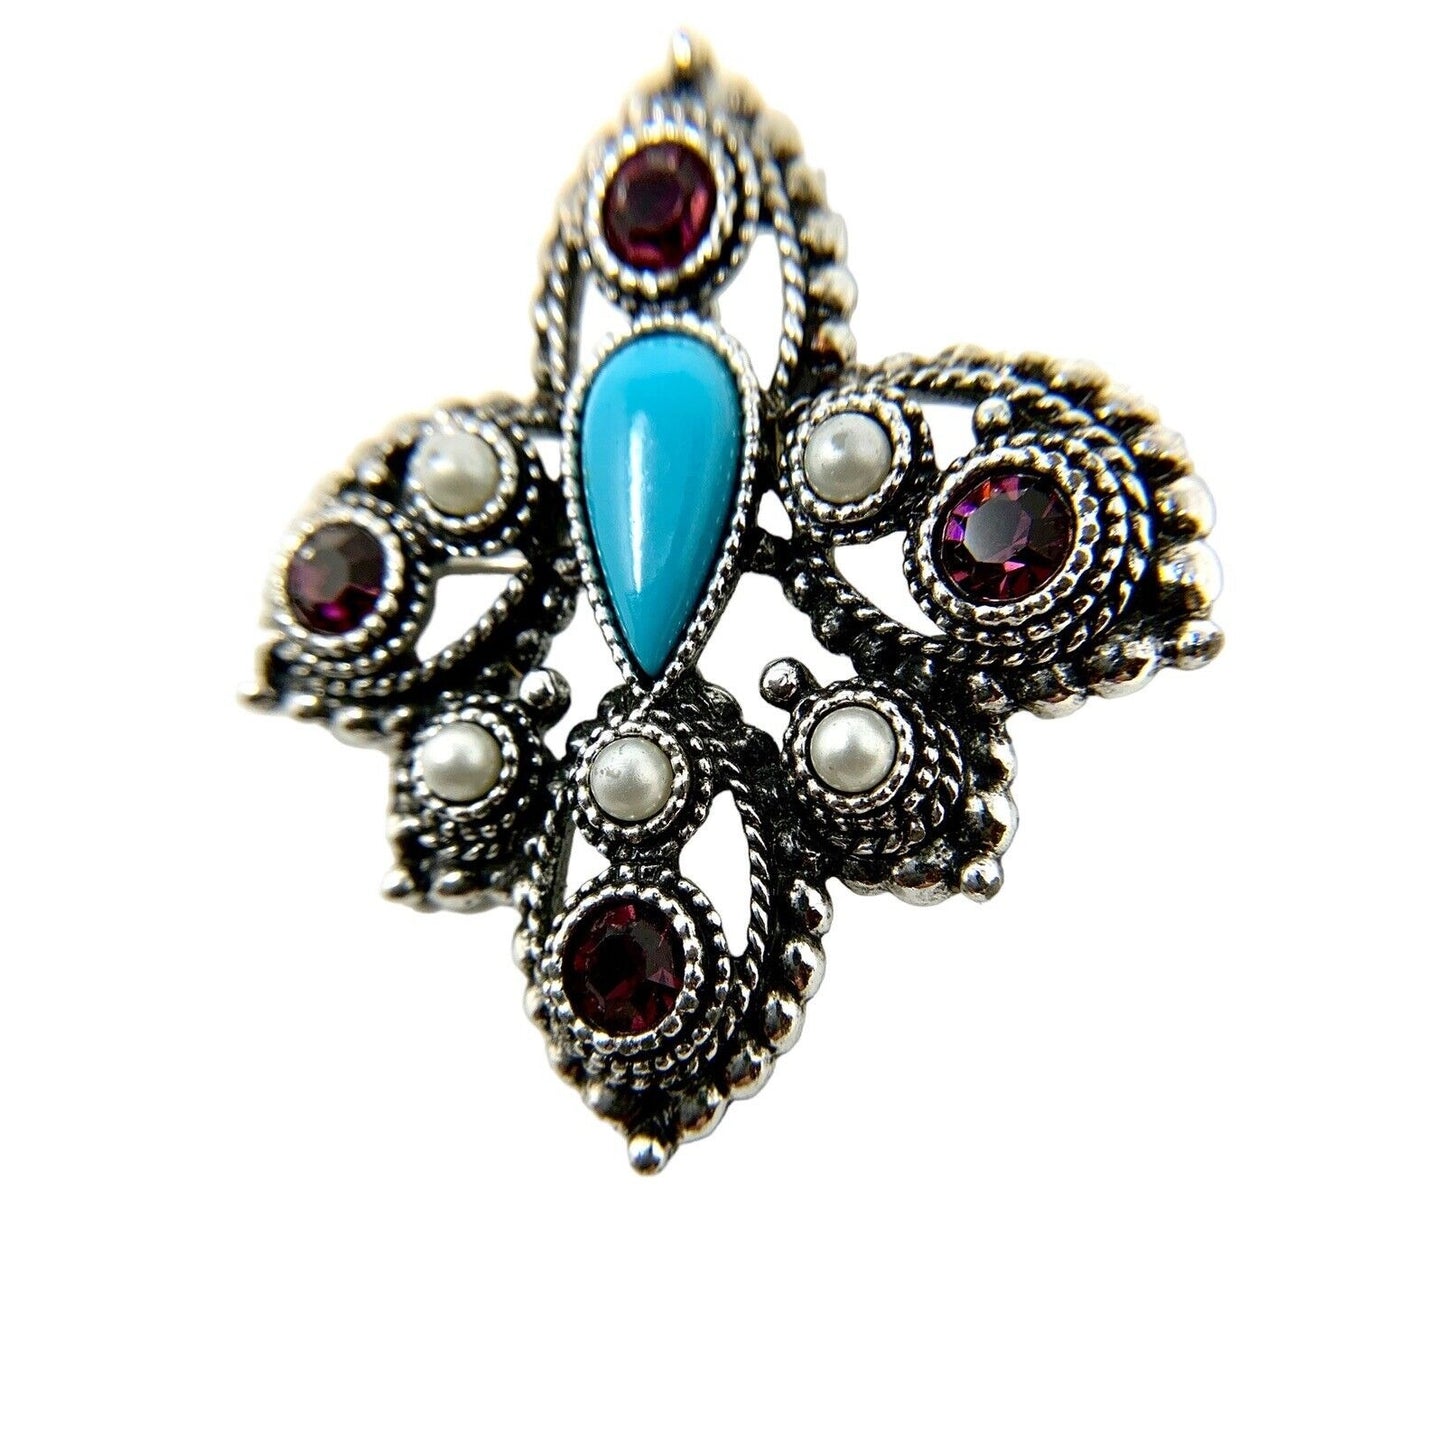 Silver-Tone Turquoise, Purple, and Faux Pearled Brooch